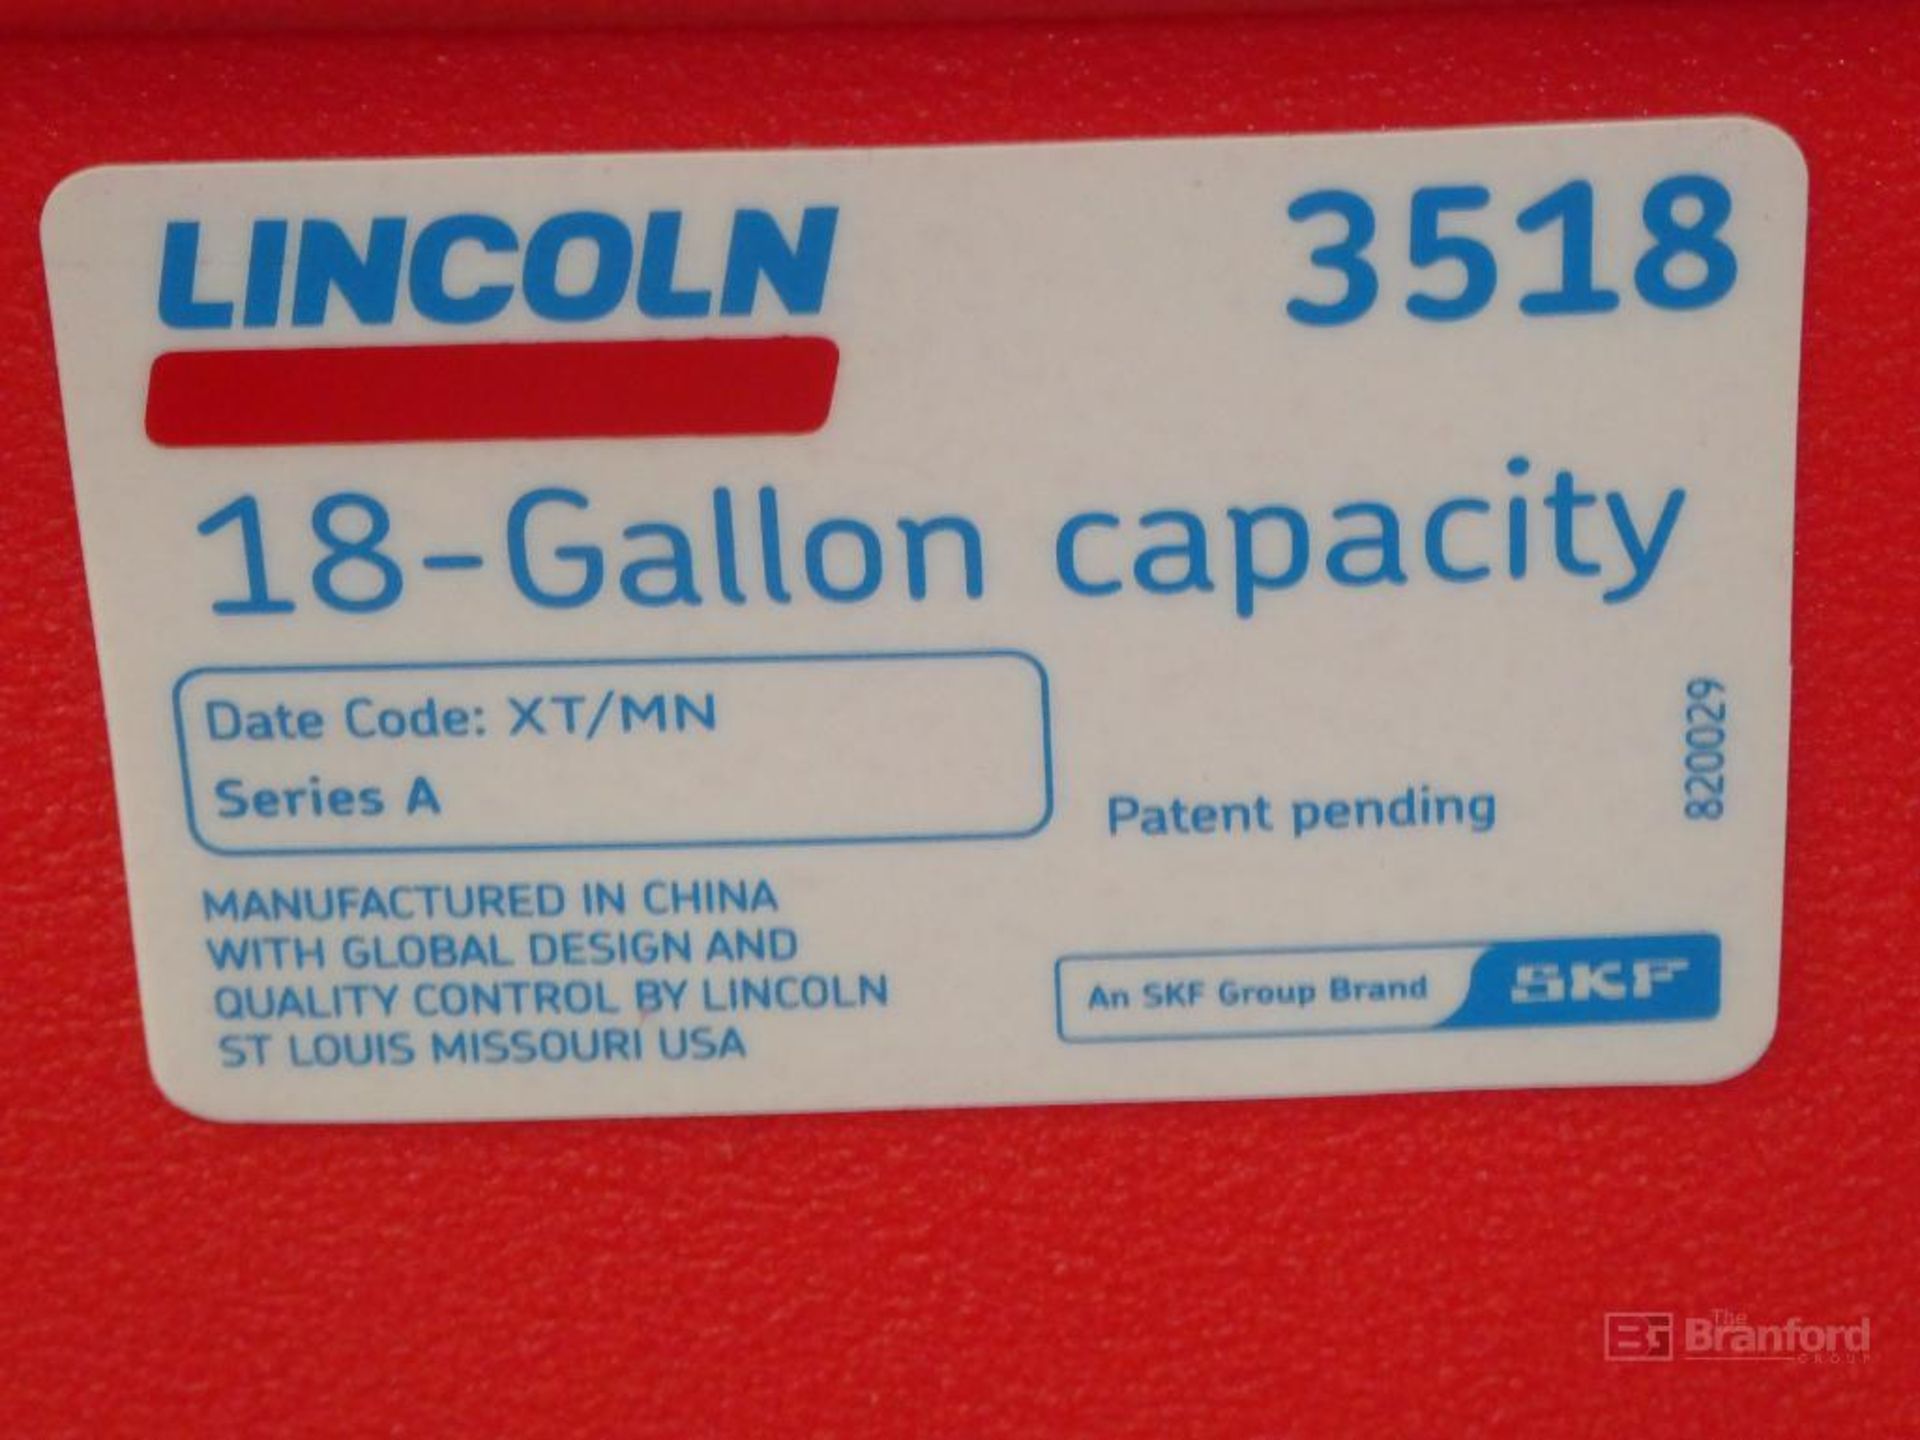 Lincoln Model 3518, Portable Poly Fluid Waste Drain Container - Image 3 of 3